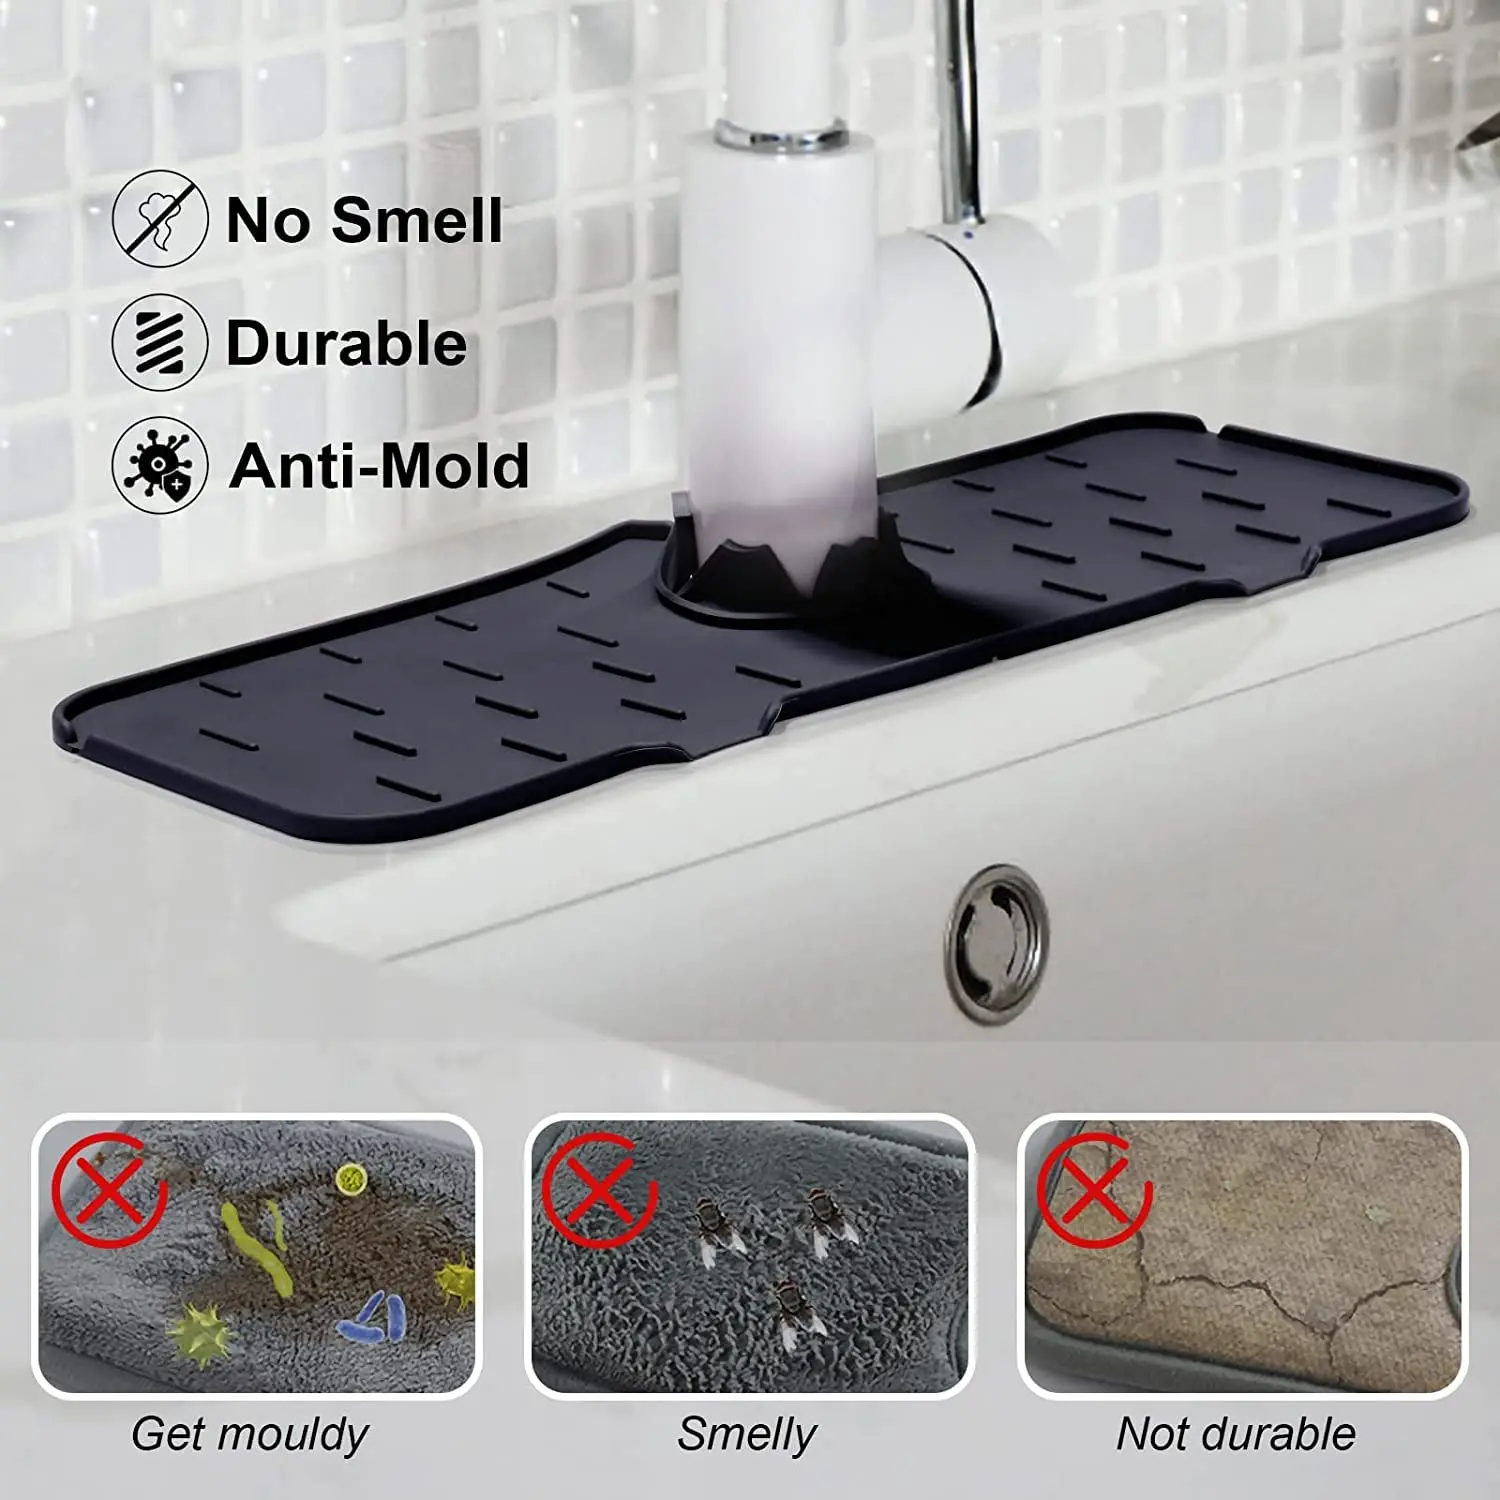 Silicone Kitchen Faucet Absorbent Mat Sink Sponge Holder Foldable Sink Drainer Bathroom Countertop Protector kitchen Organizer